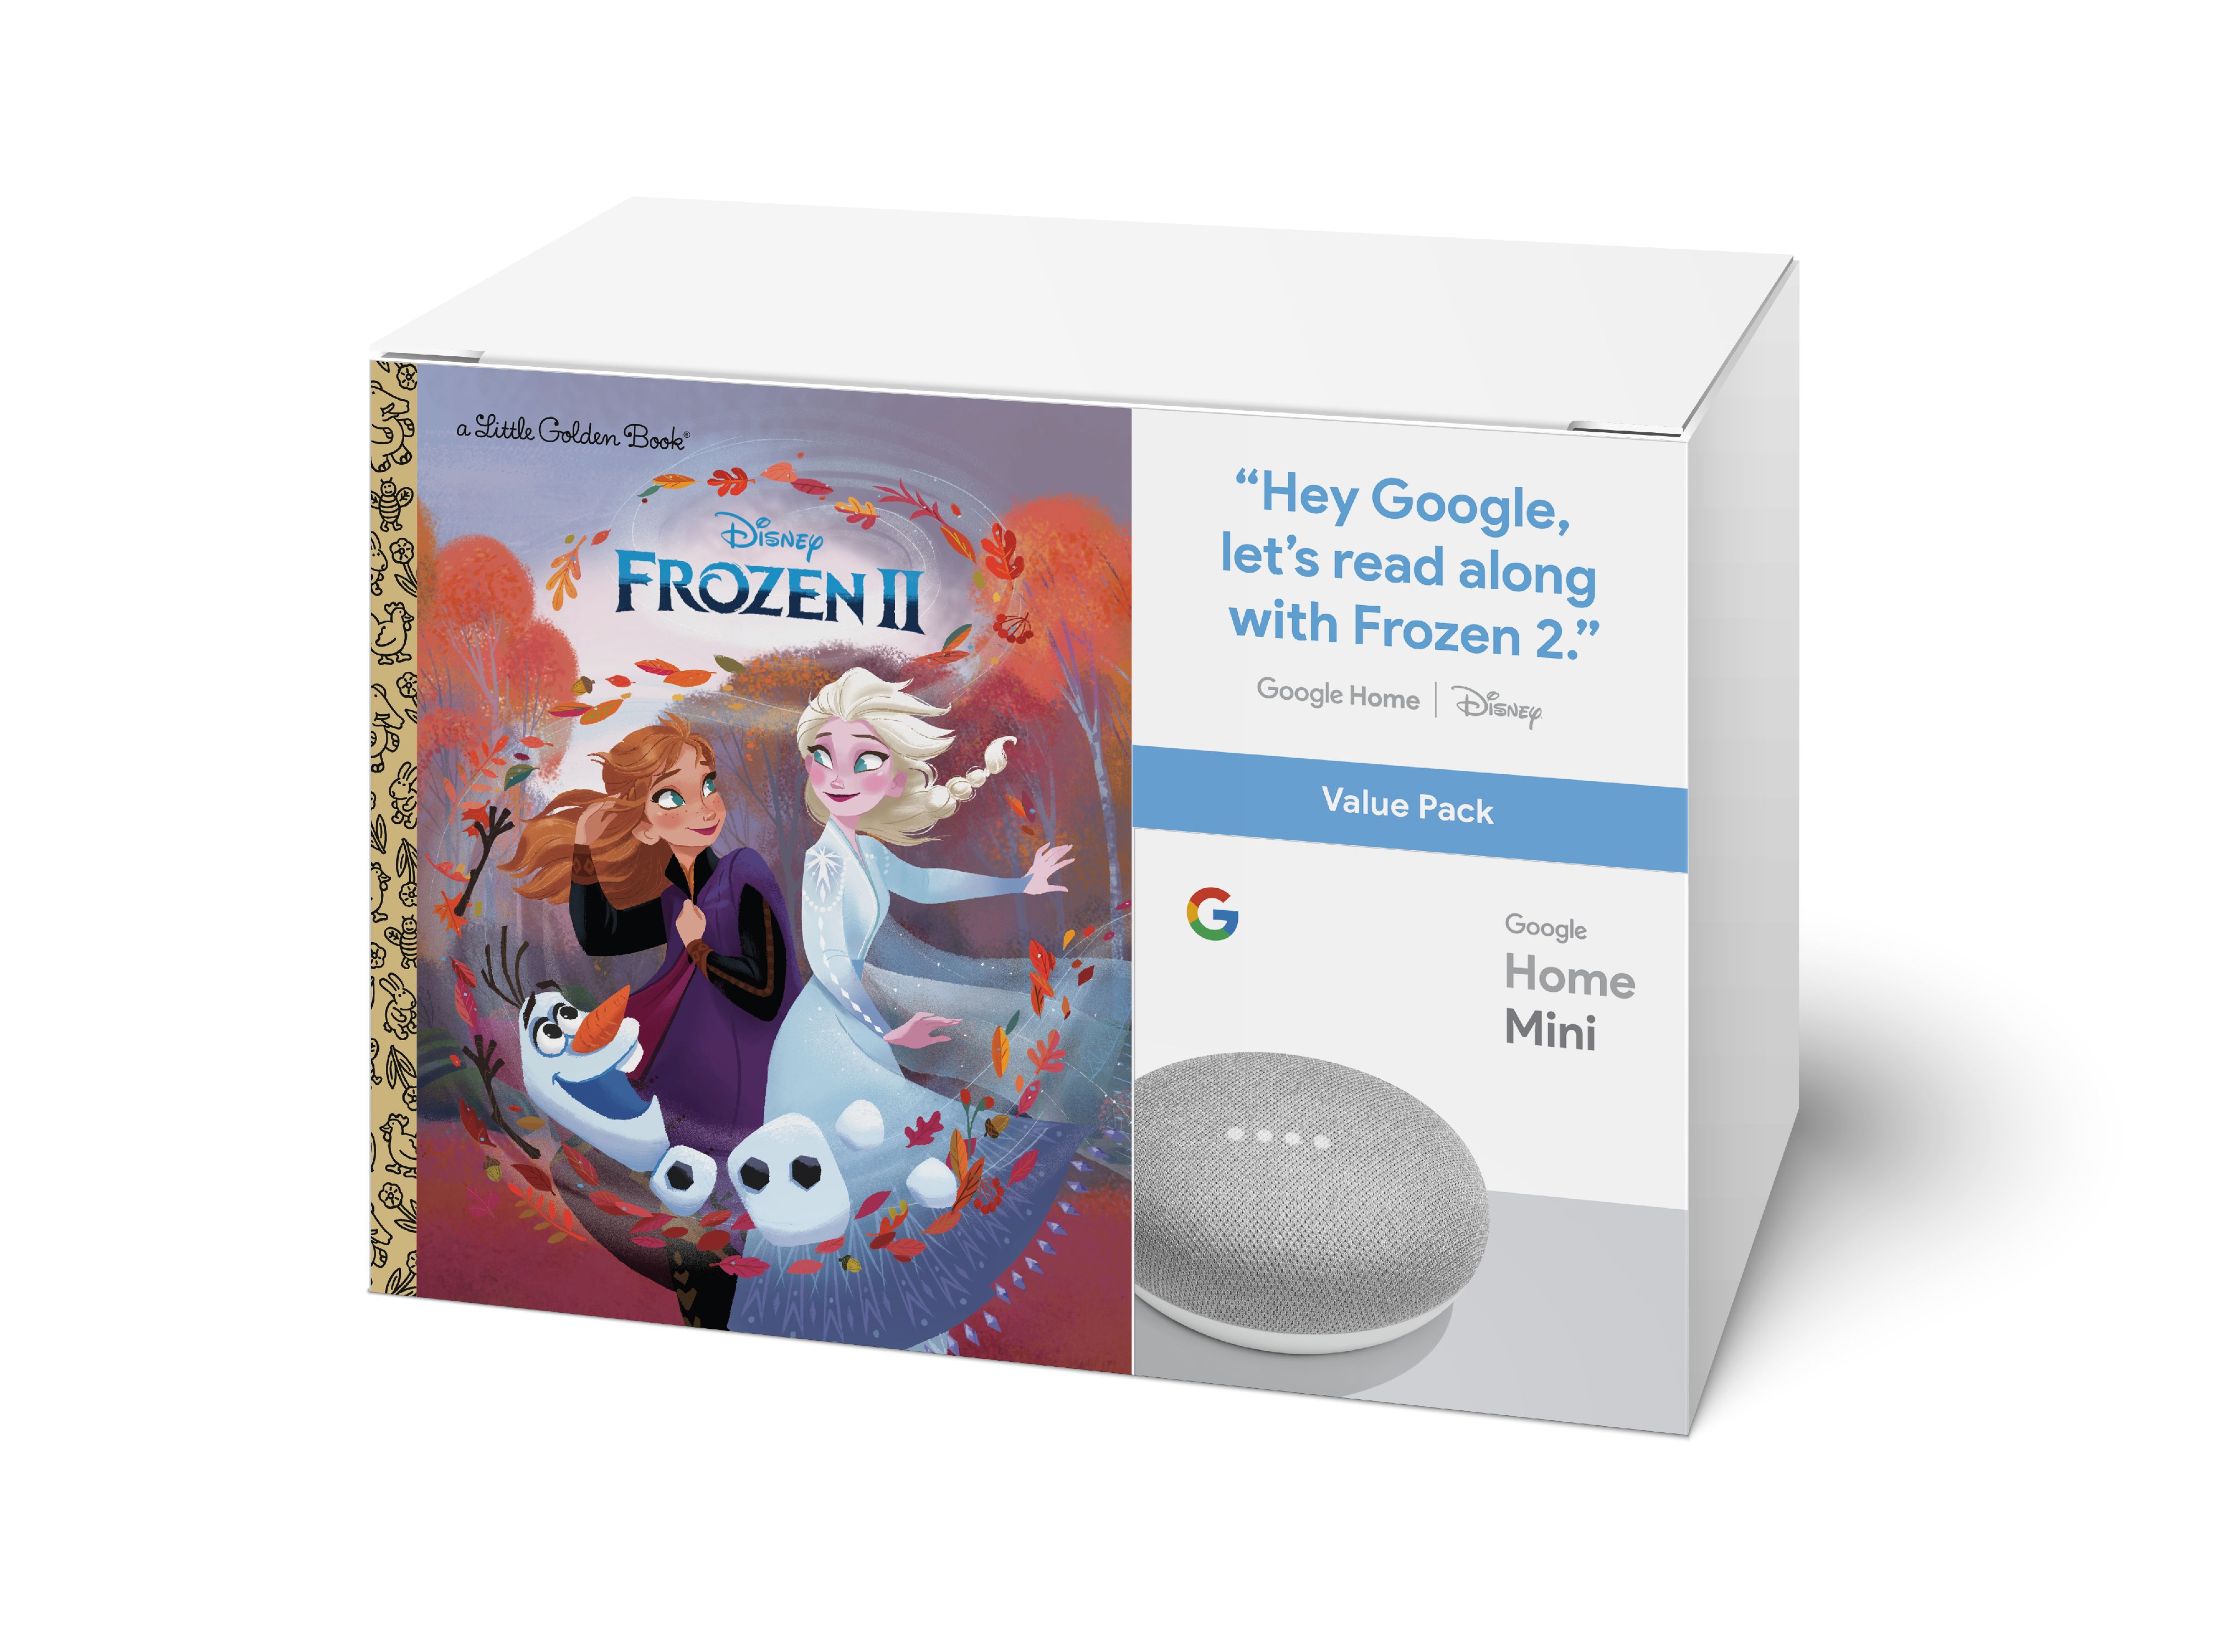 Google Home Mini with Frozen